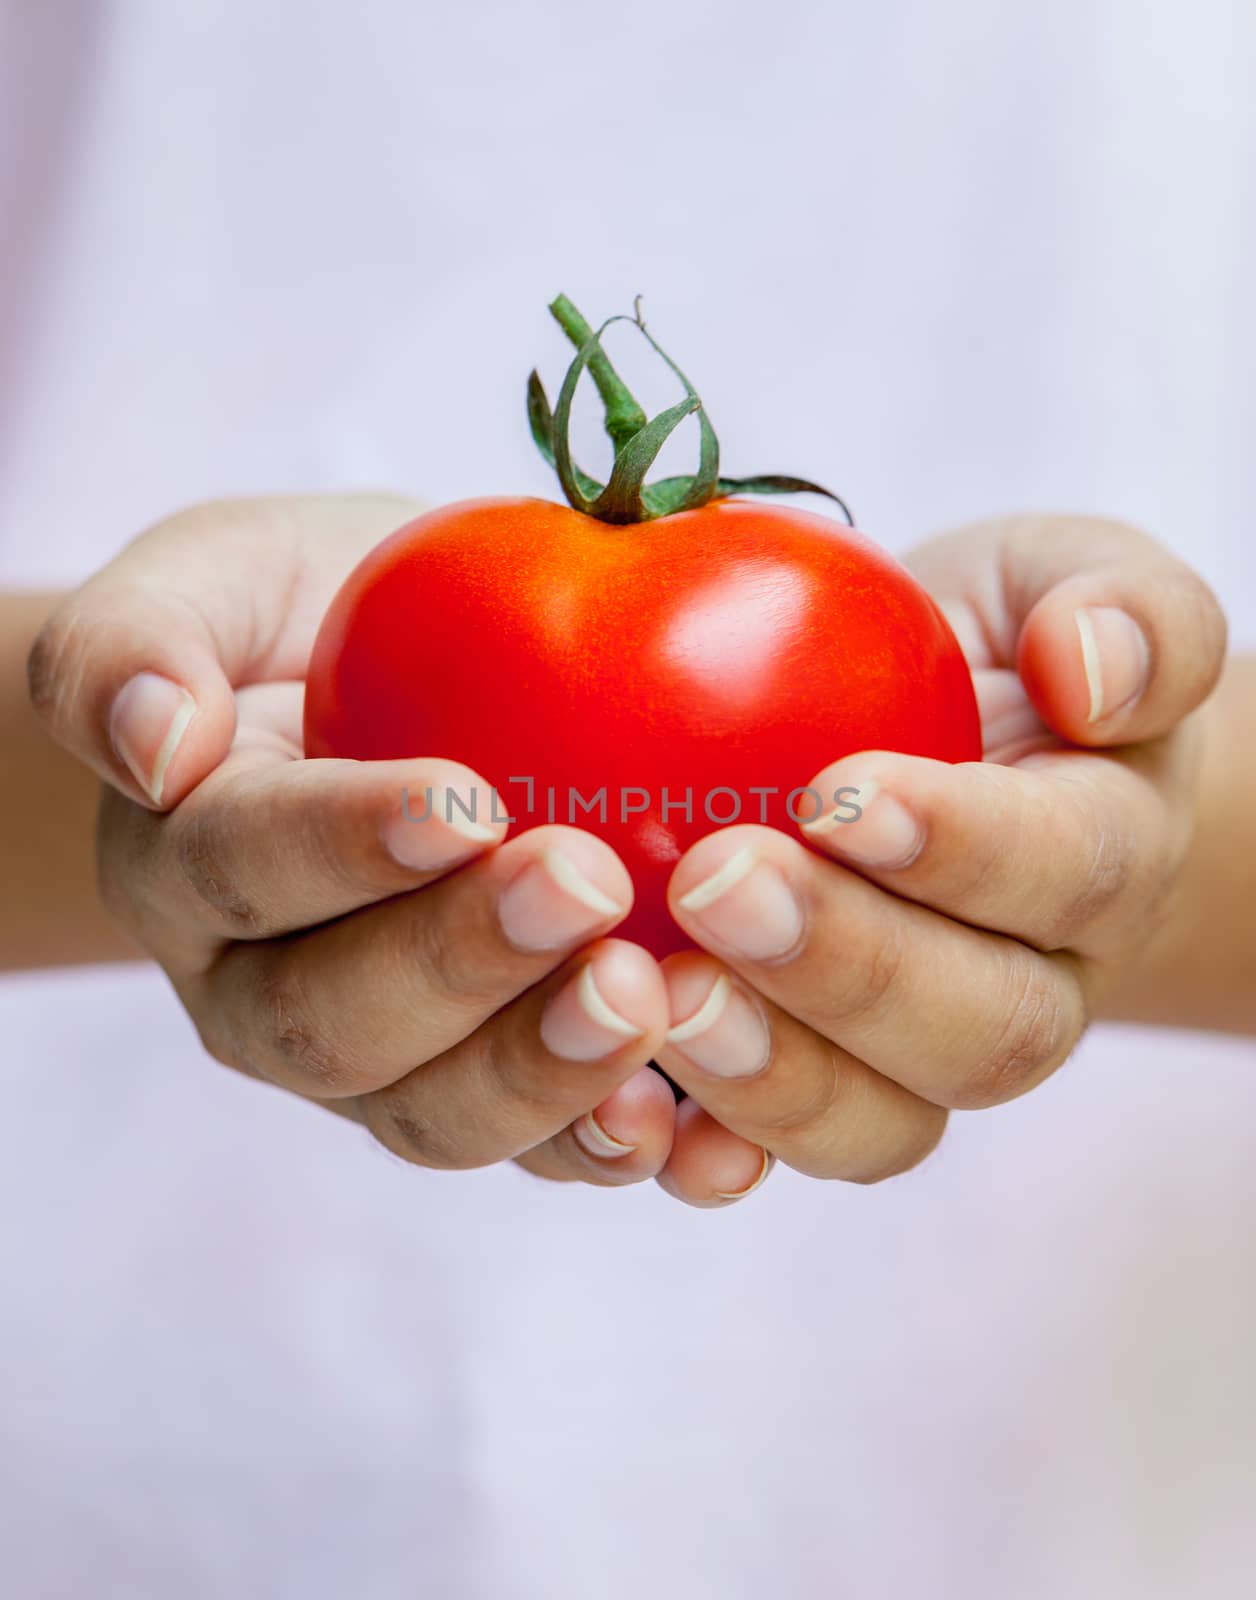 The Girl holding tomato. - Healthy food concept. by kerdkanno